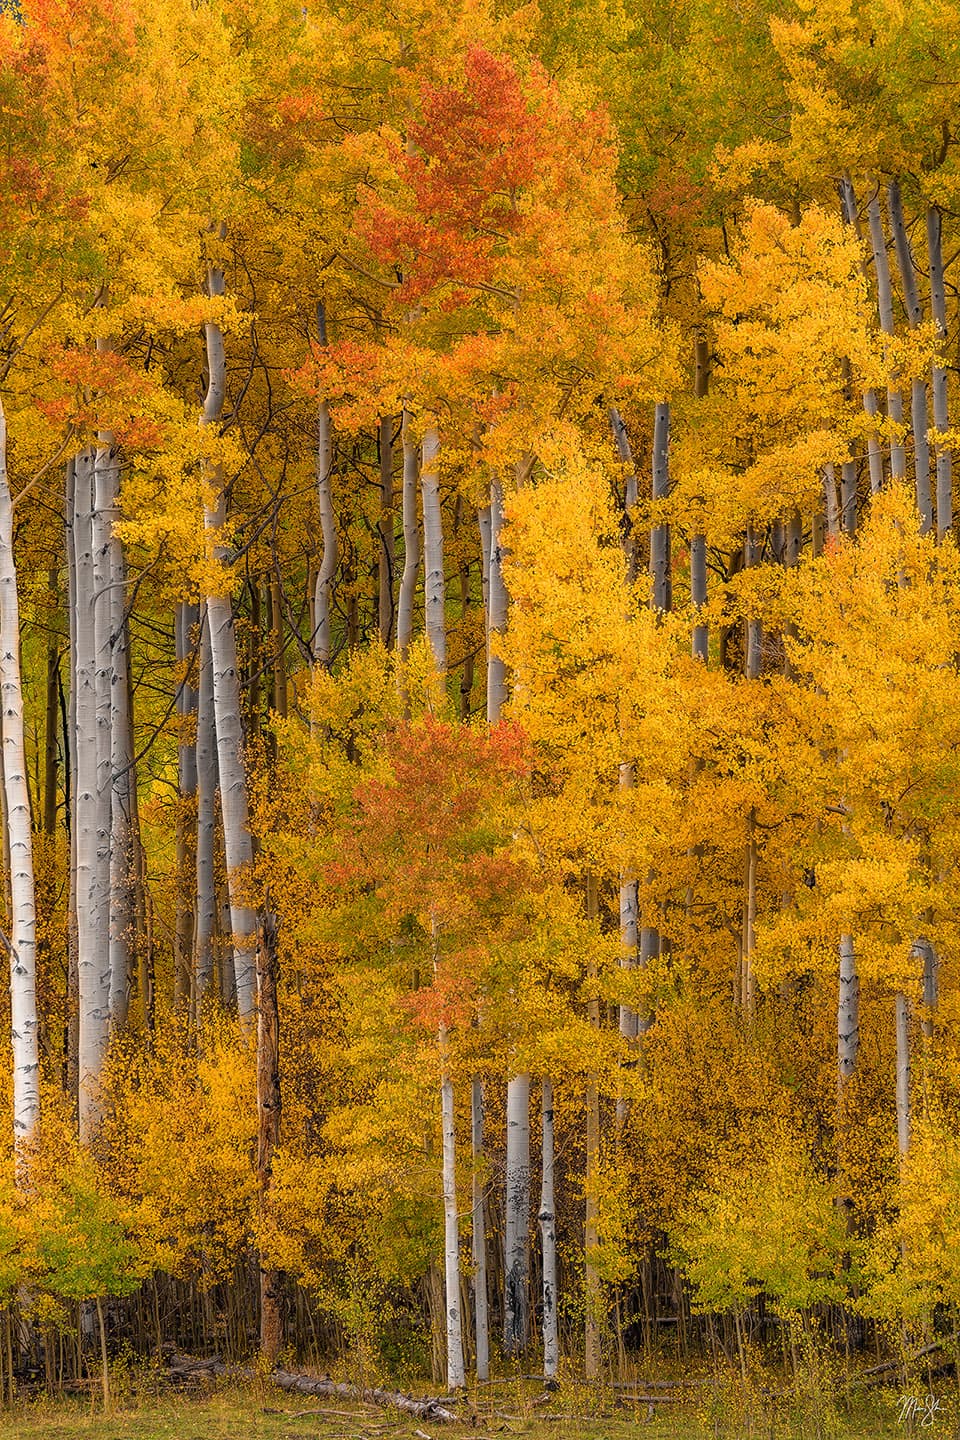 Beauty of the Forest - Near Silver Jack Reservoir, Colorado